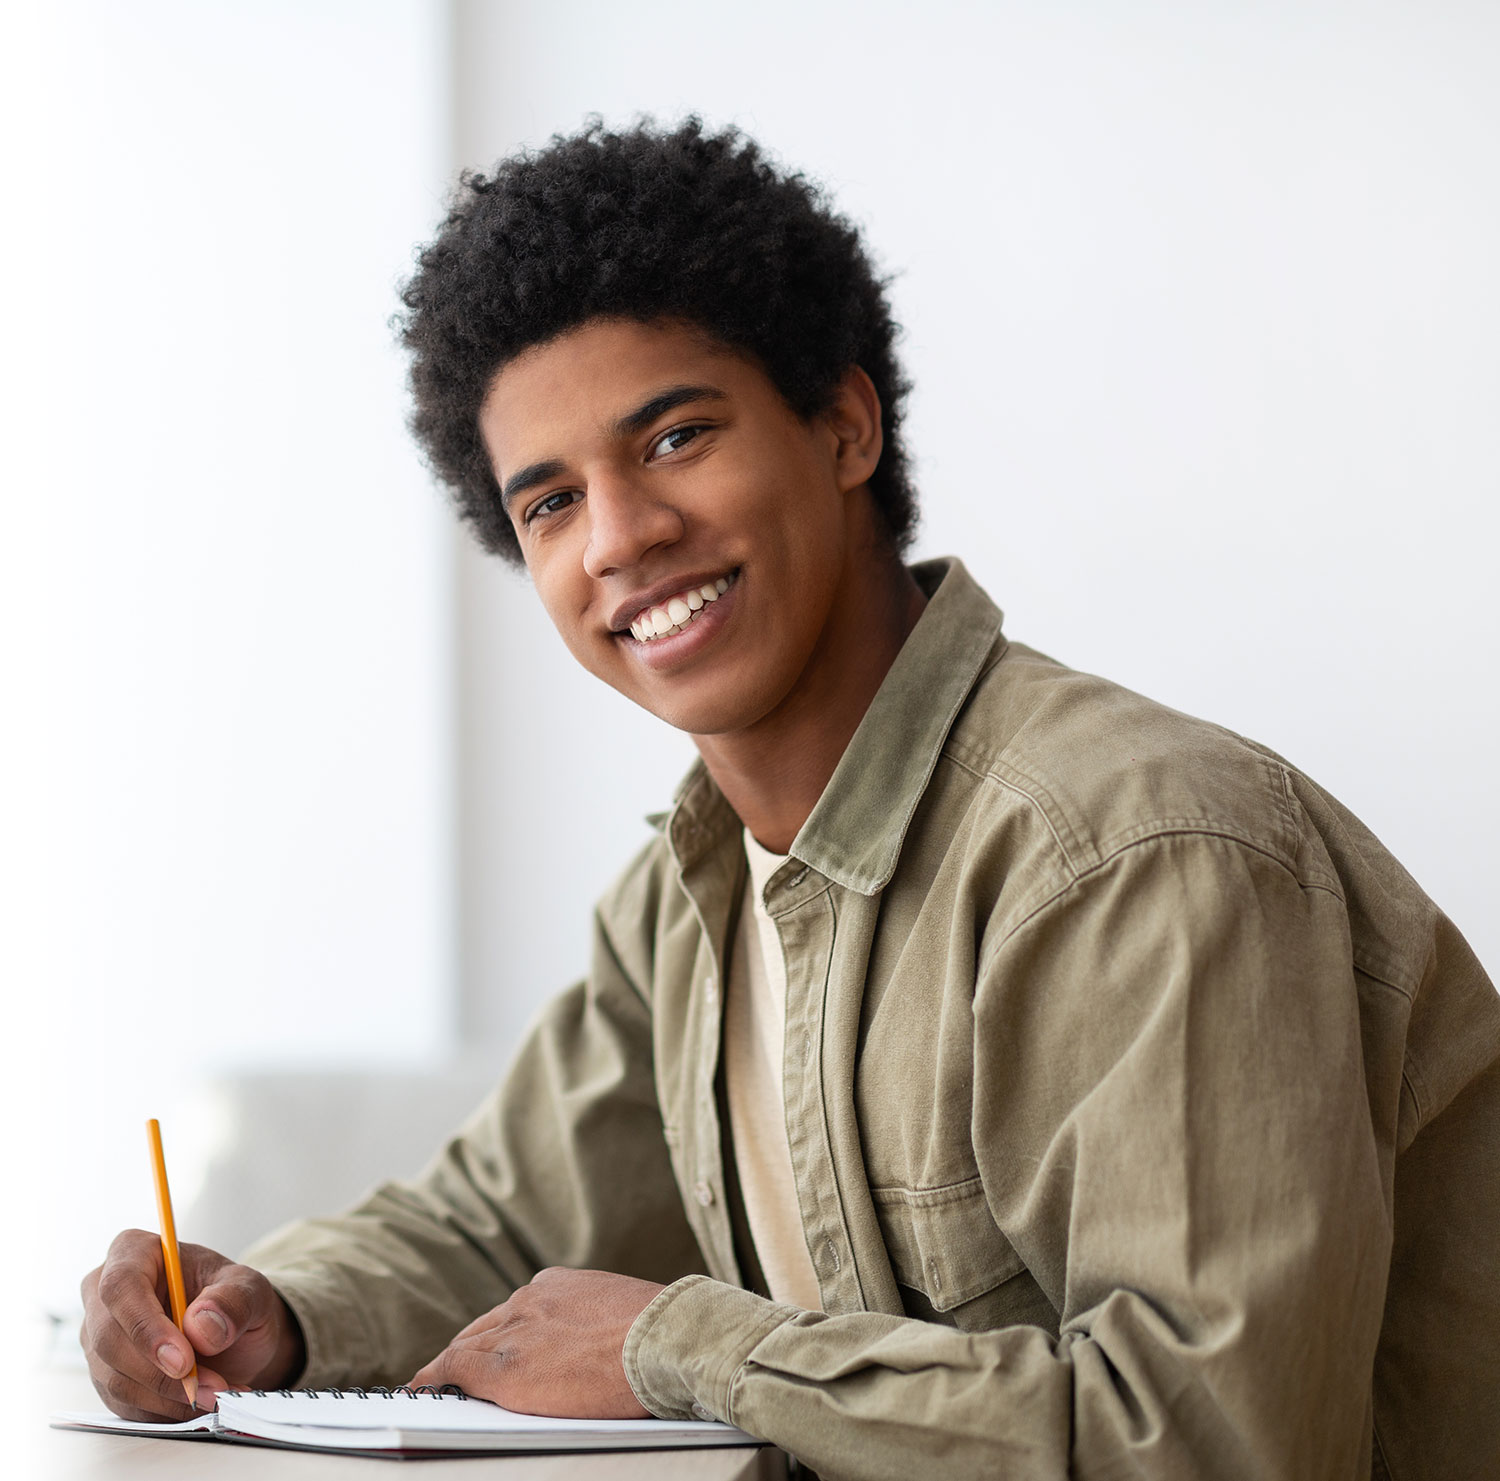 Student smiling while holding a pencil